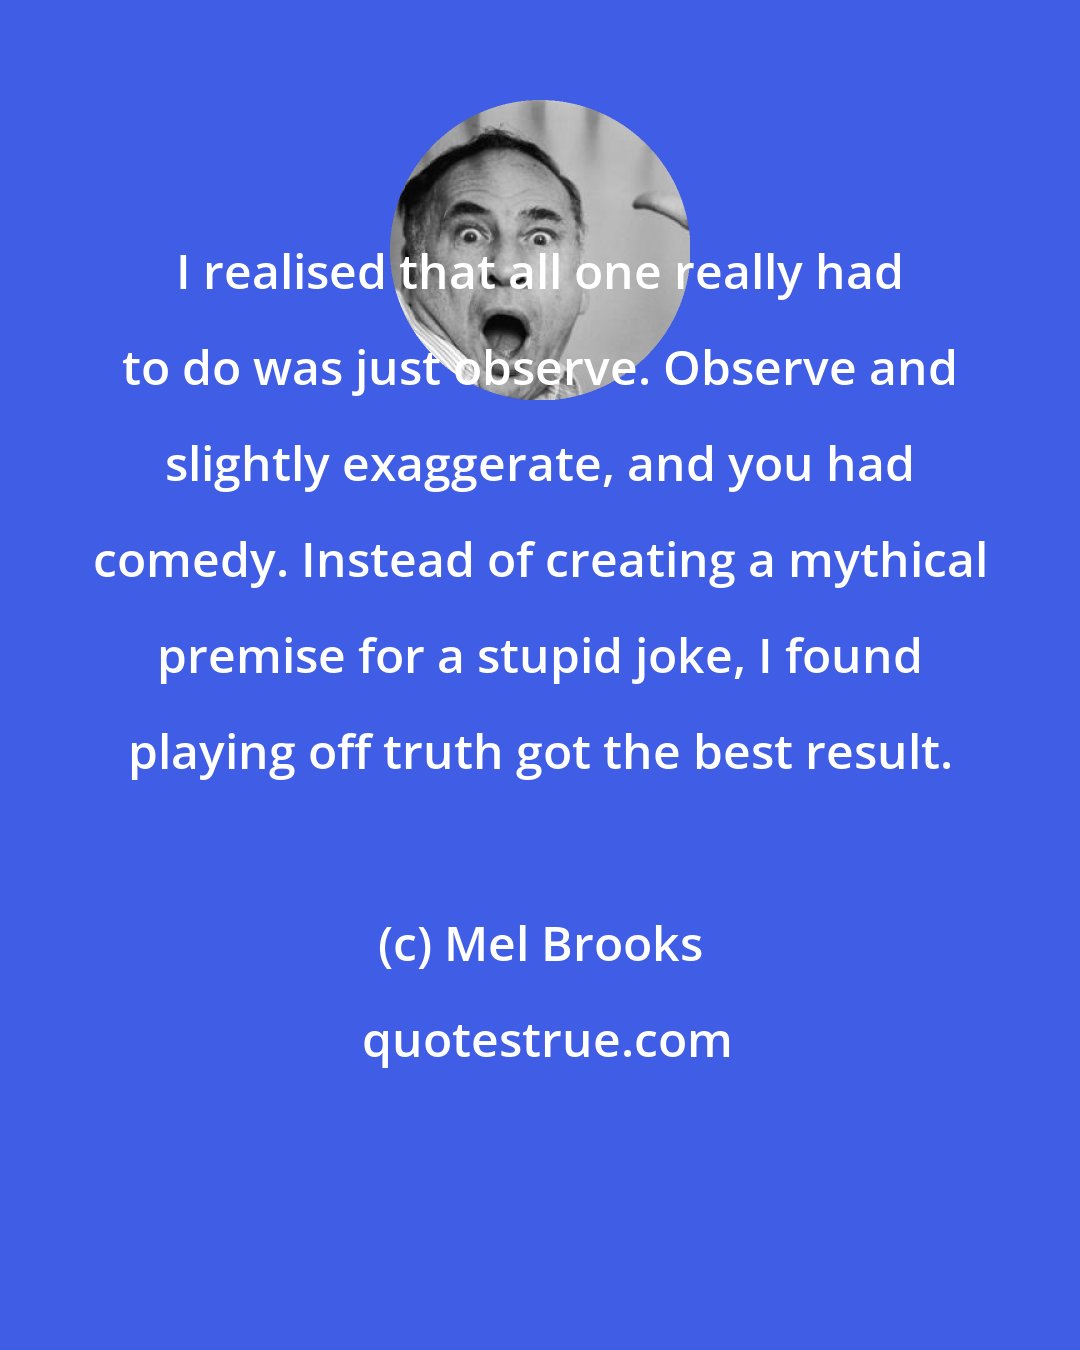 Mel Brooks: I realised that all one really had to do was just observe. Observe and slightly exaggerate, and you had comedy. Instead of creating a mythical premise for a stupid joke, I found playing off truth got the best result.